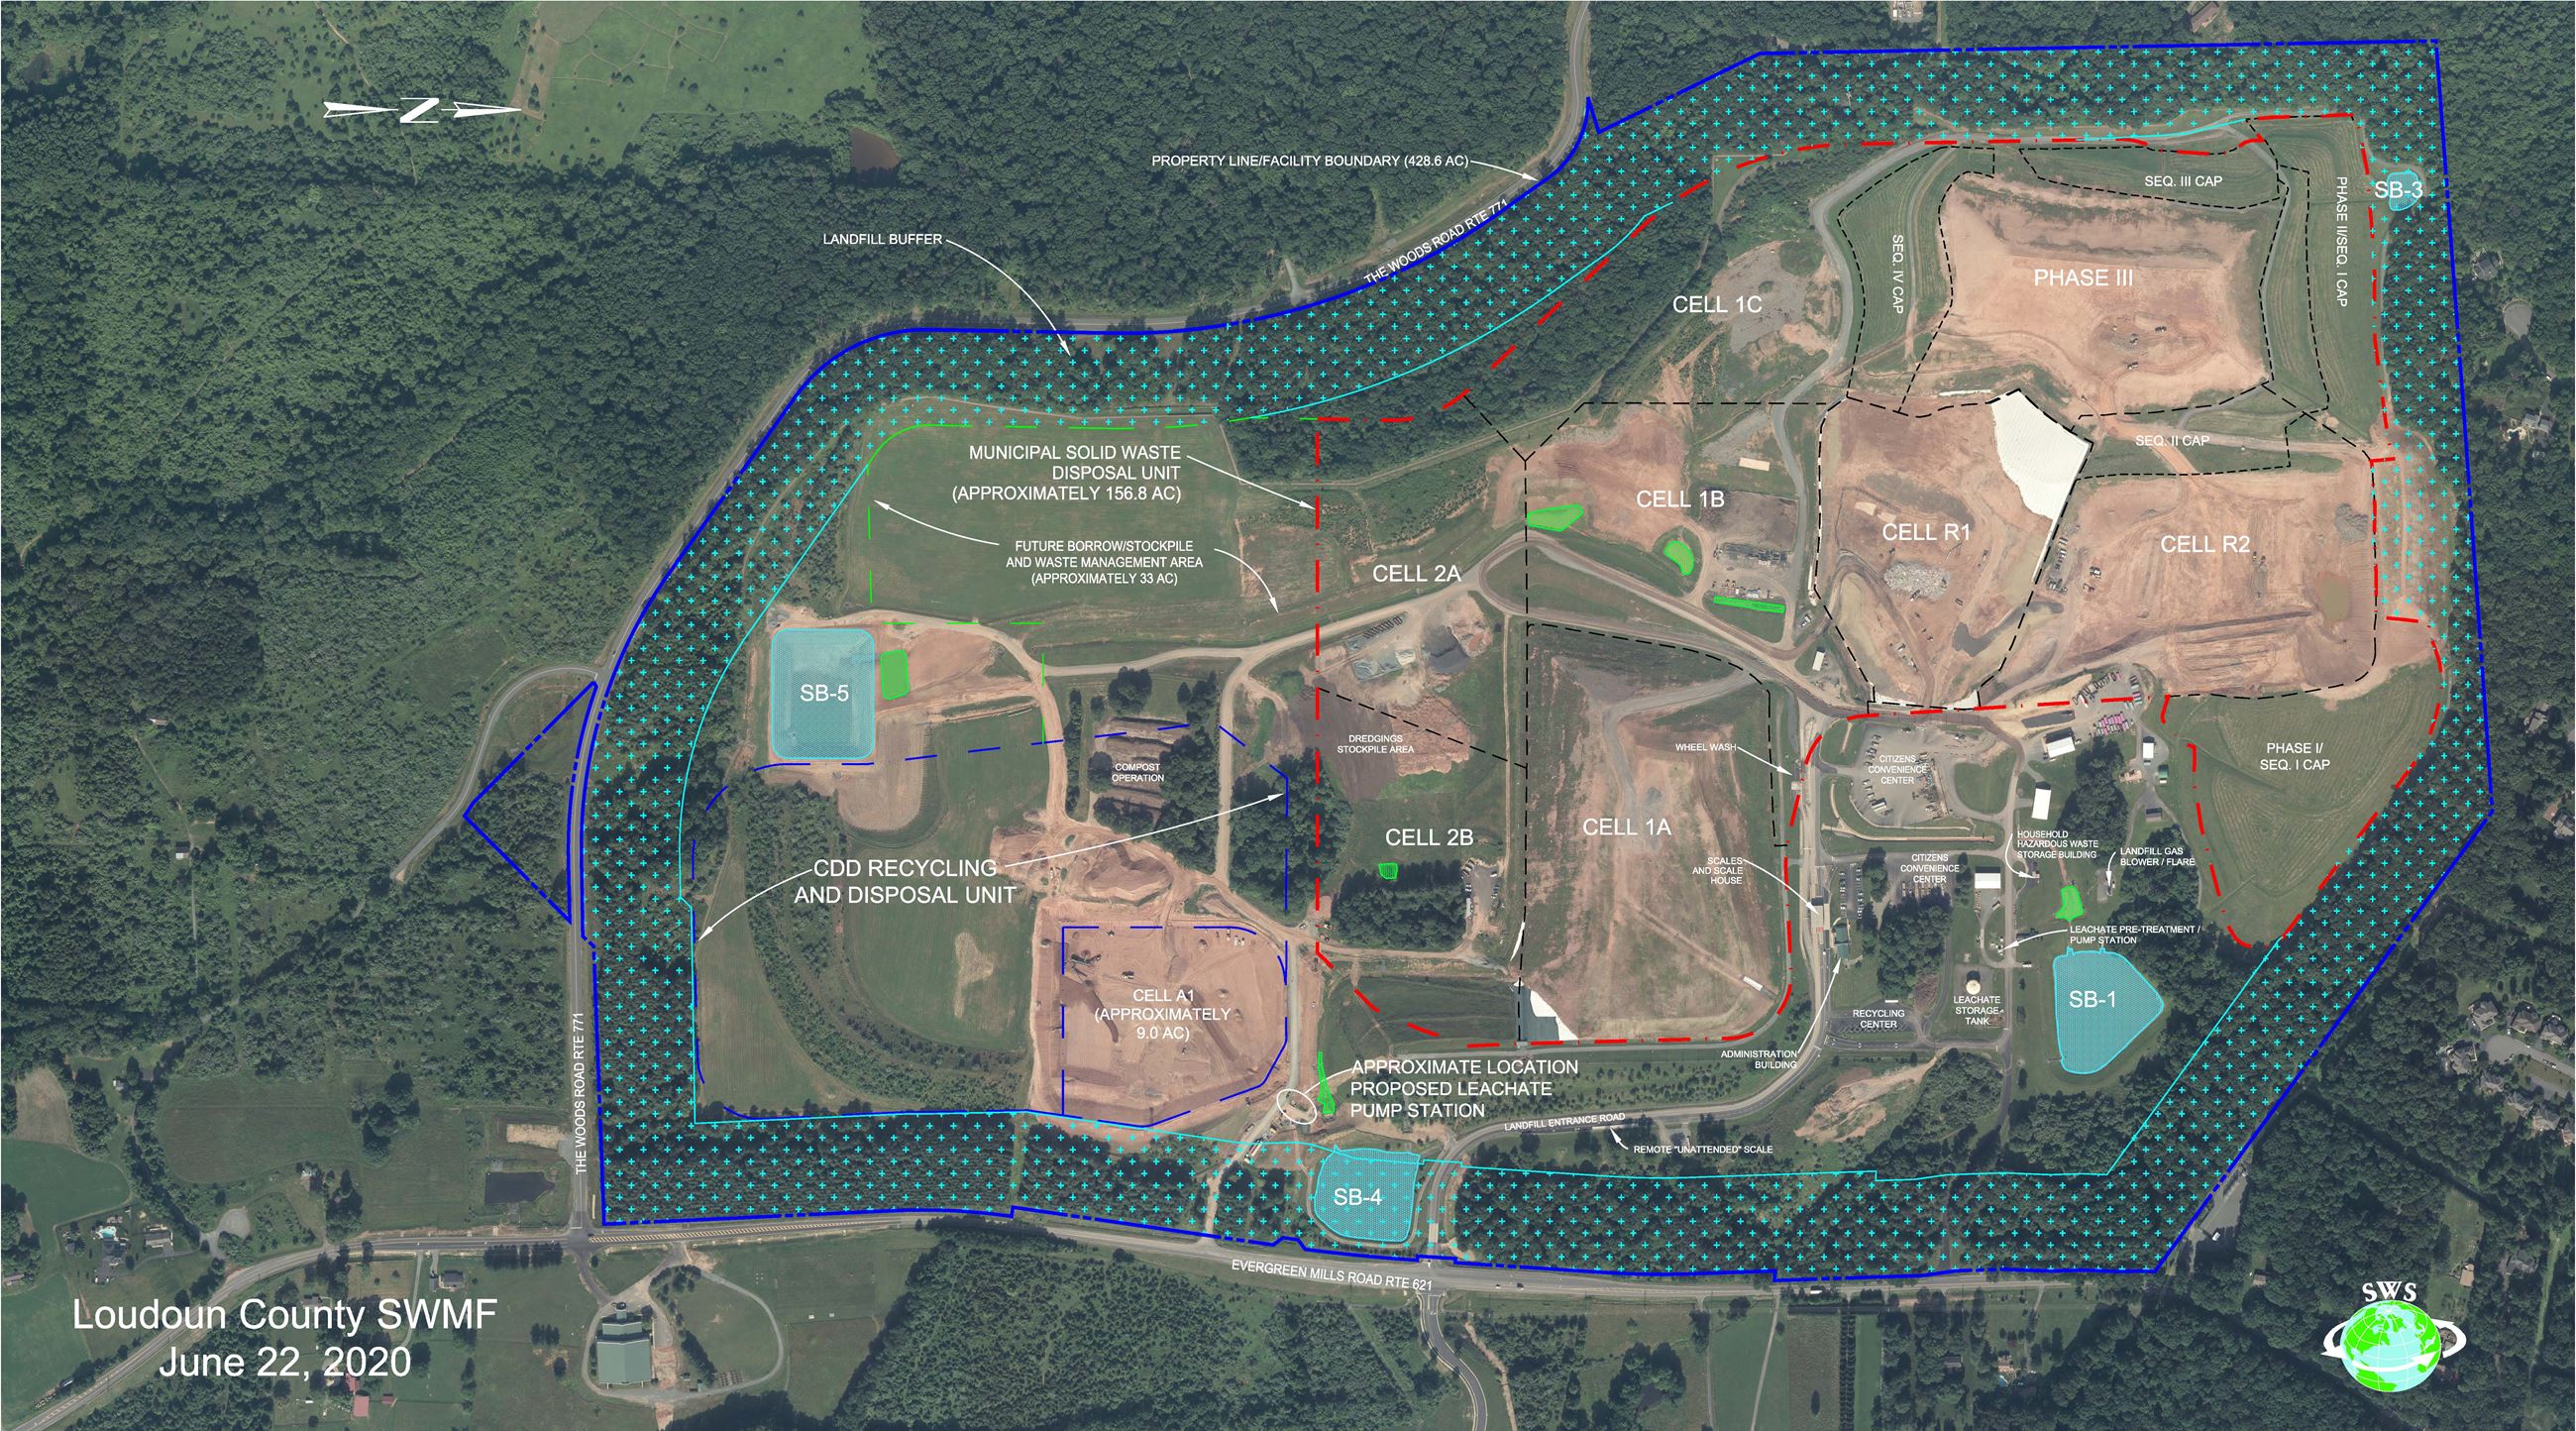 Link to a larger image of the Loudoun County landfill layout